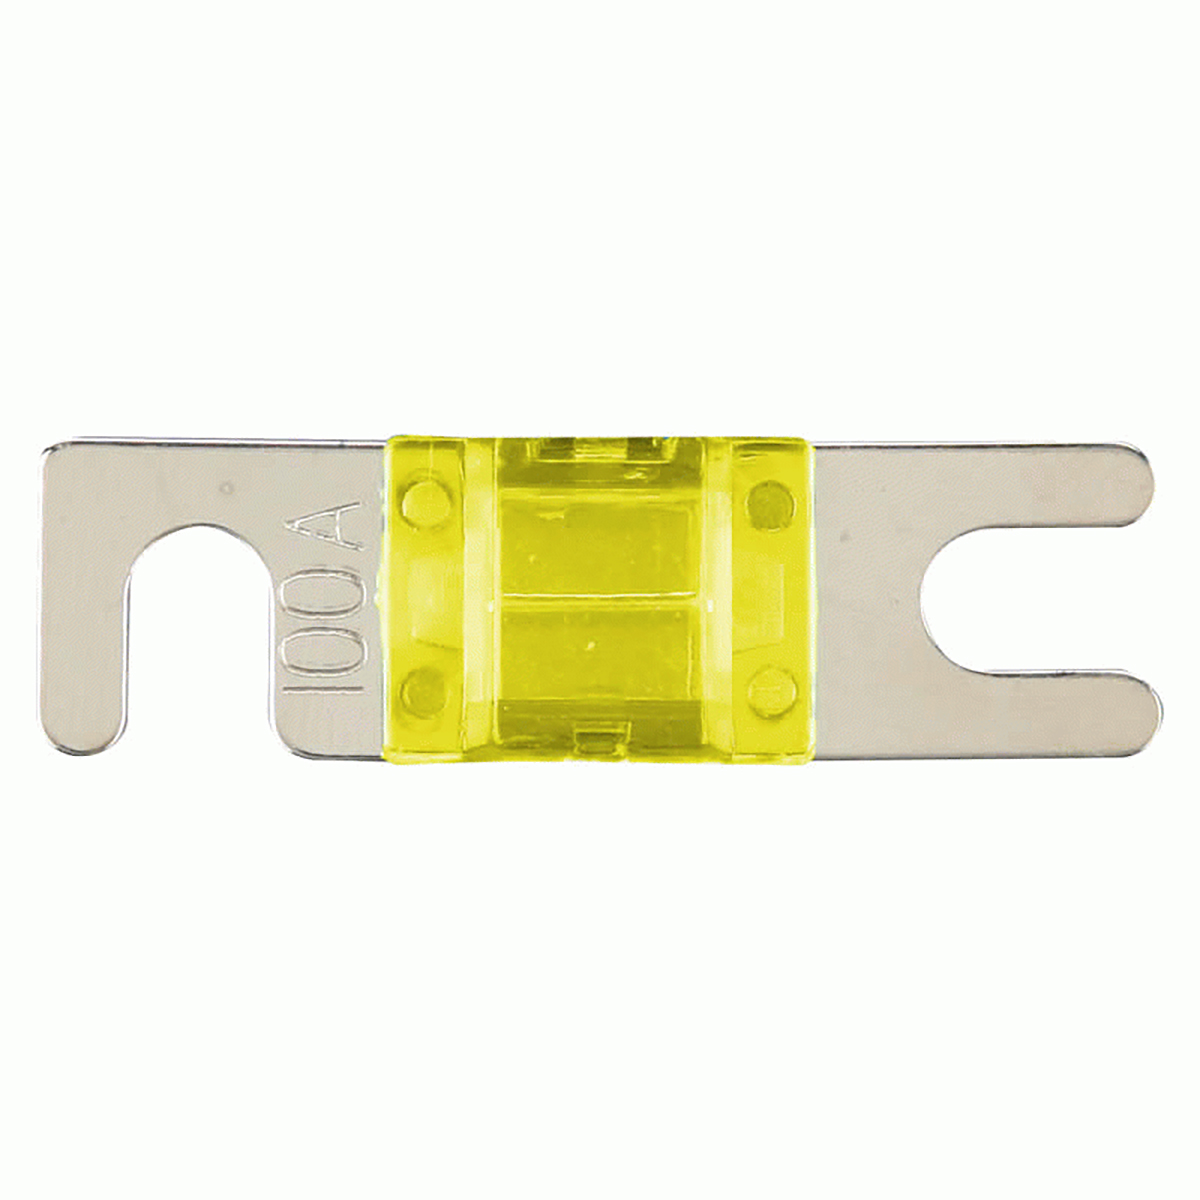 MINI ANL 100 AMP FUSE PACKAGE OF 2